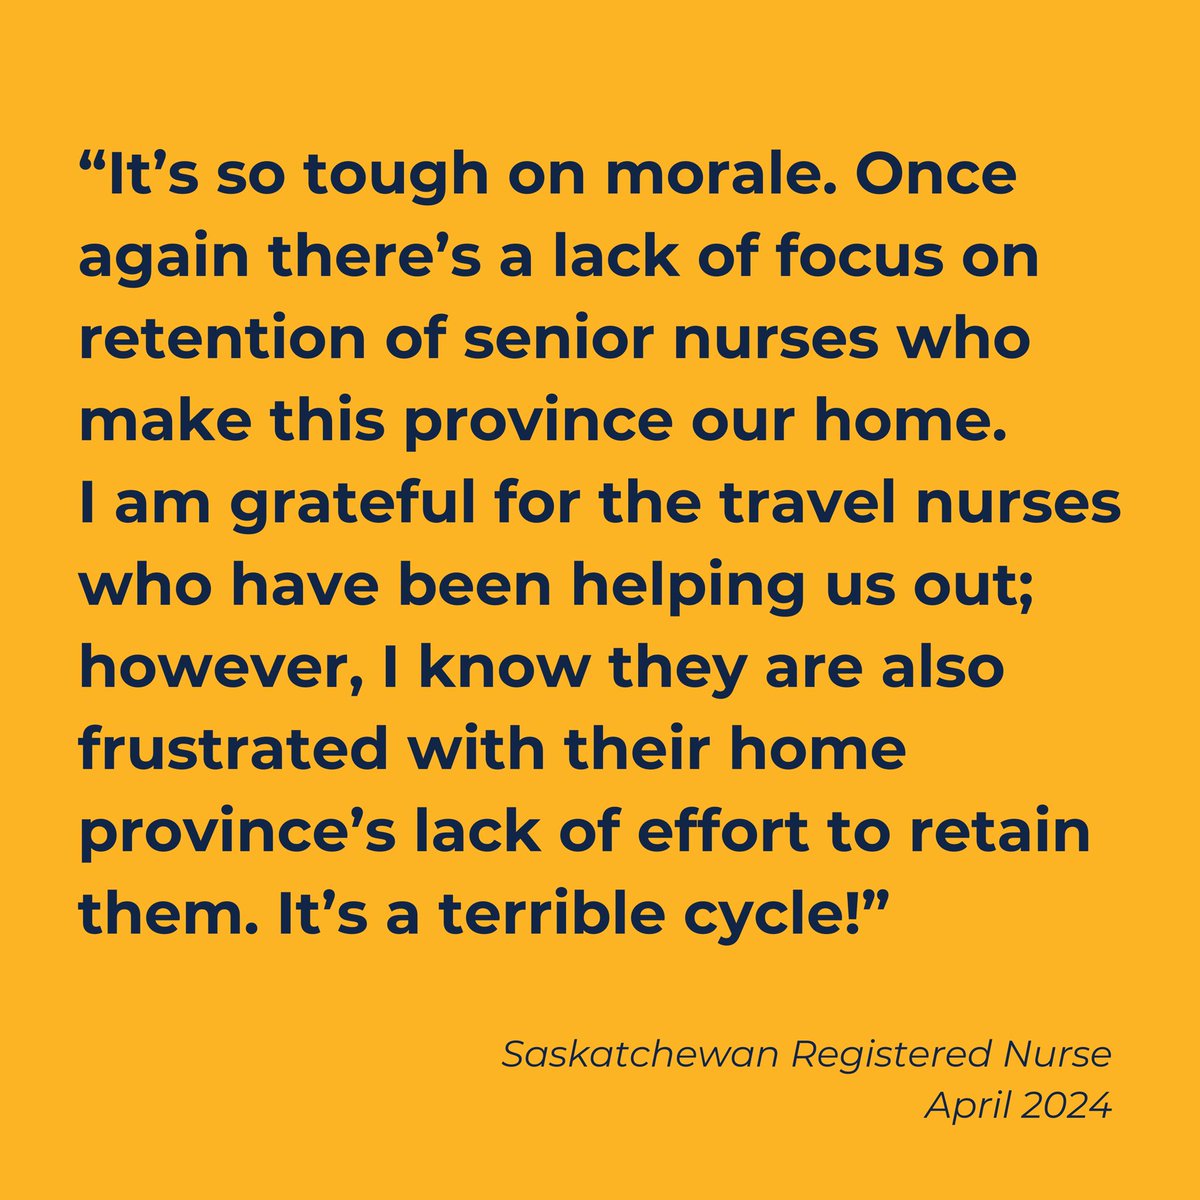 This comment is not a one-off. We hear similar all the time. $59 million in 2023 and on track for $70+ million in 2024. We should be investing in Saskatchewan’s nurses and sustainable, homegrown solutions to staffing shortages. #skpoli